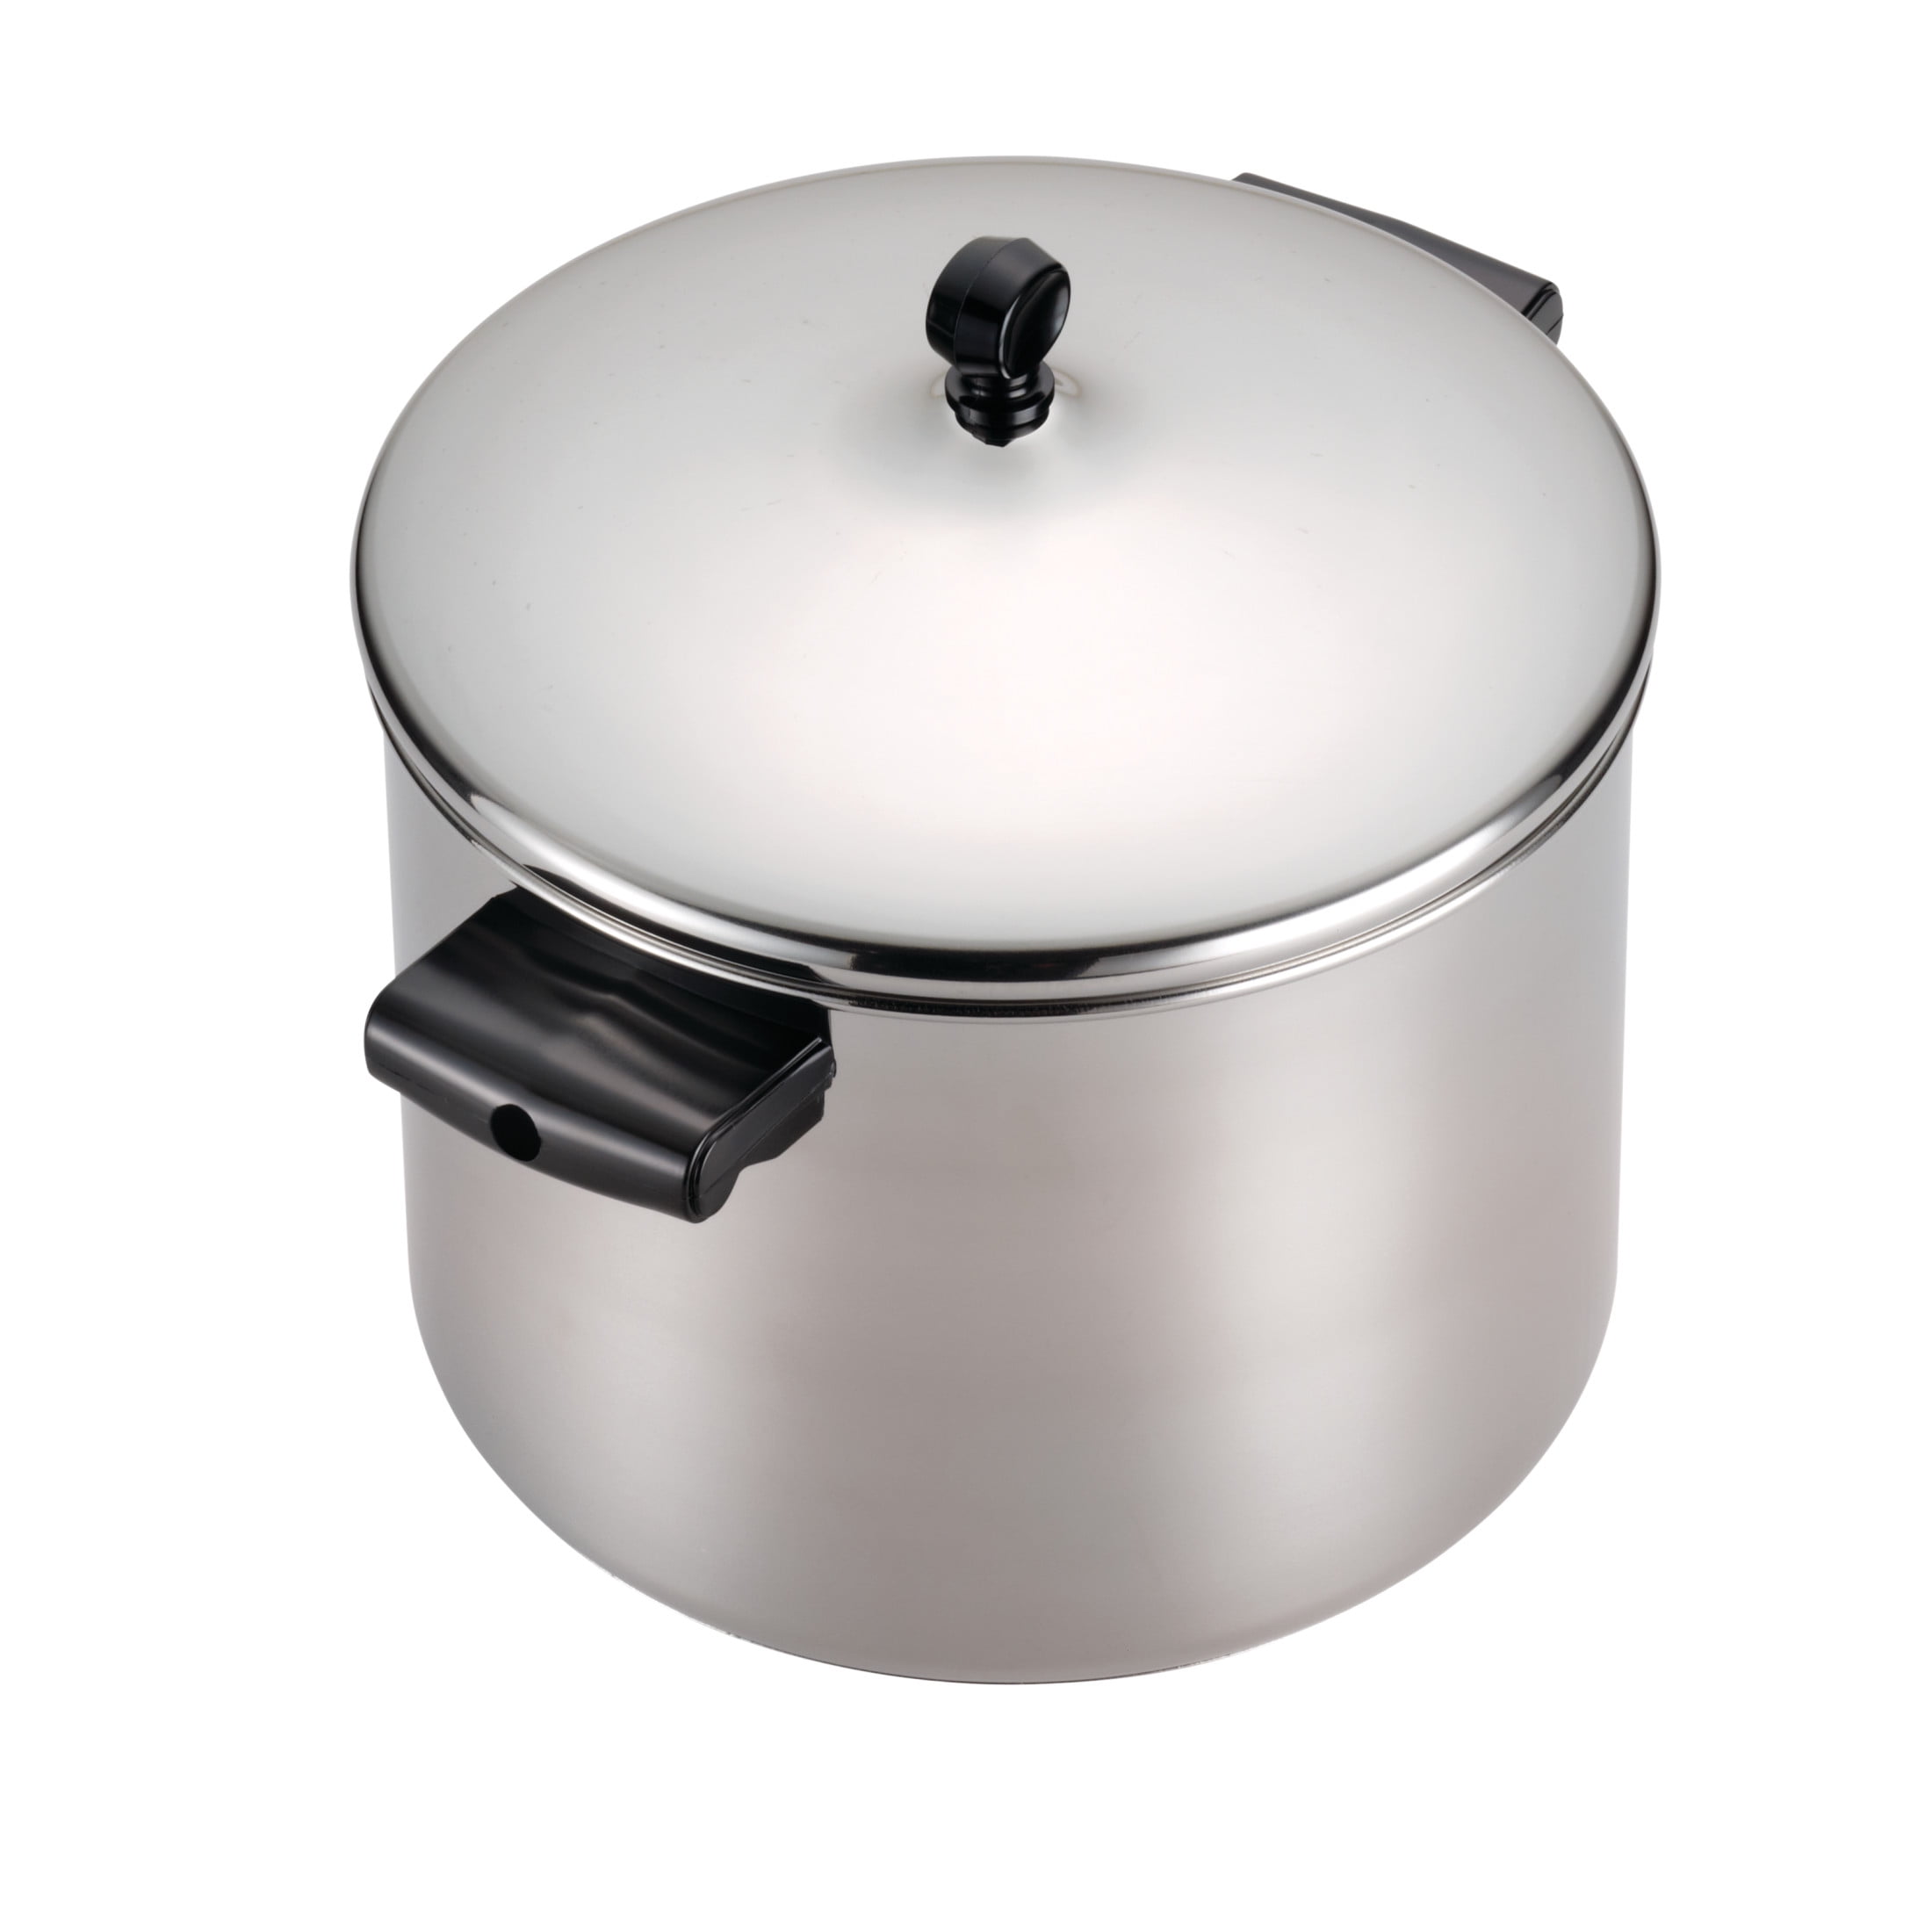 Farberware 8-Quart Classic Series Stainless Steel Stockpot with